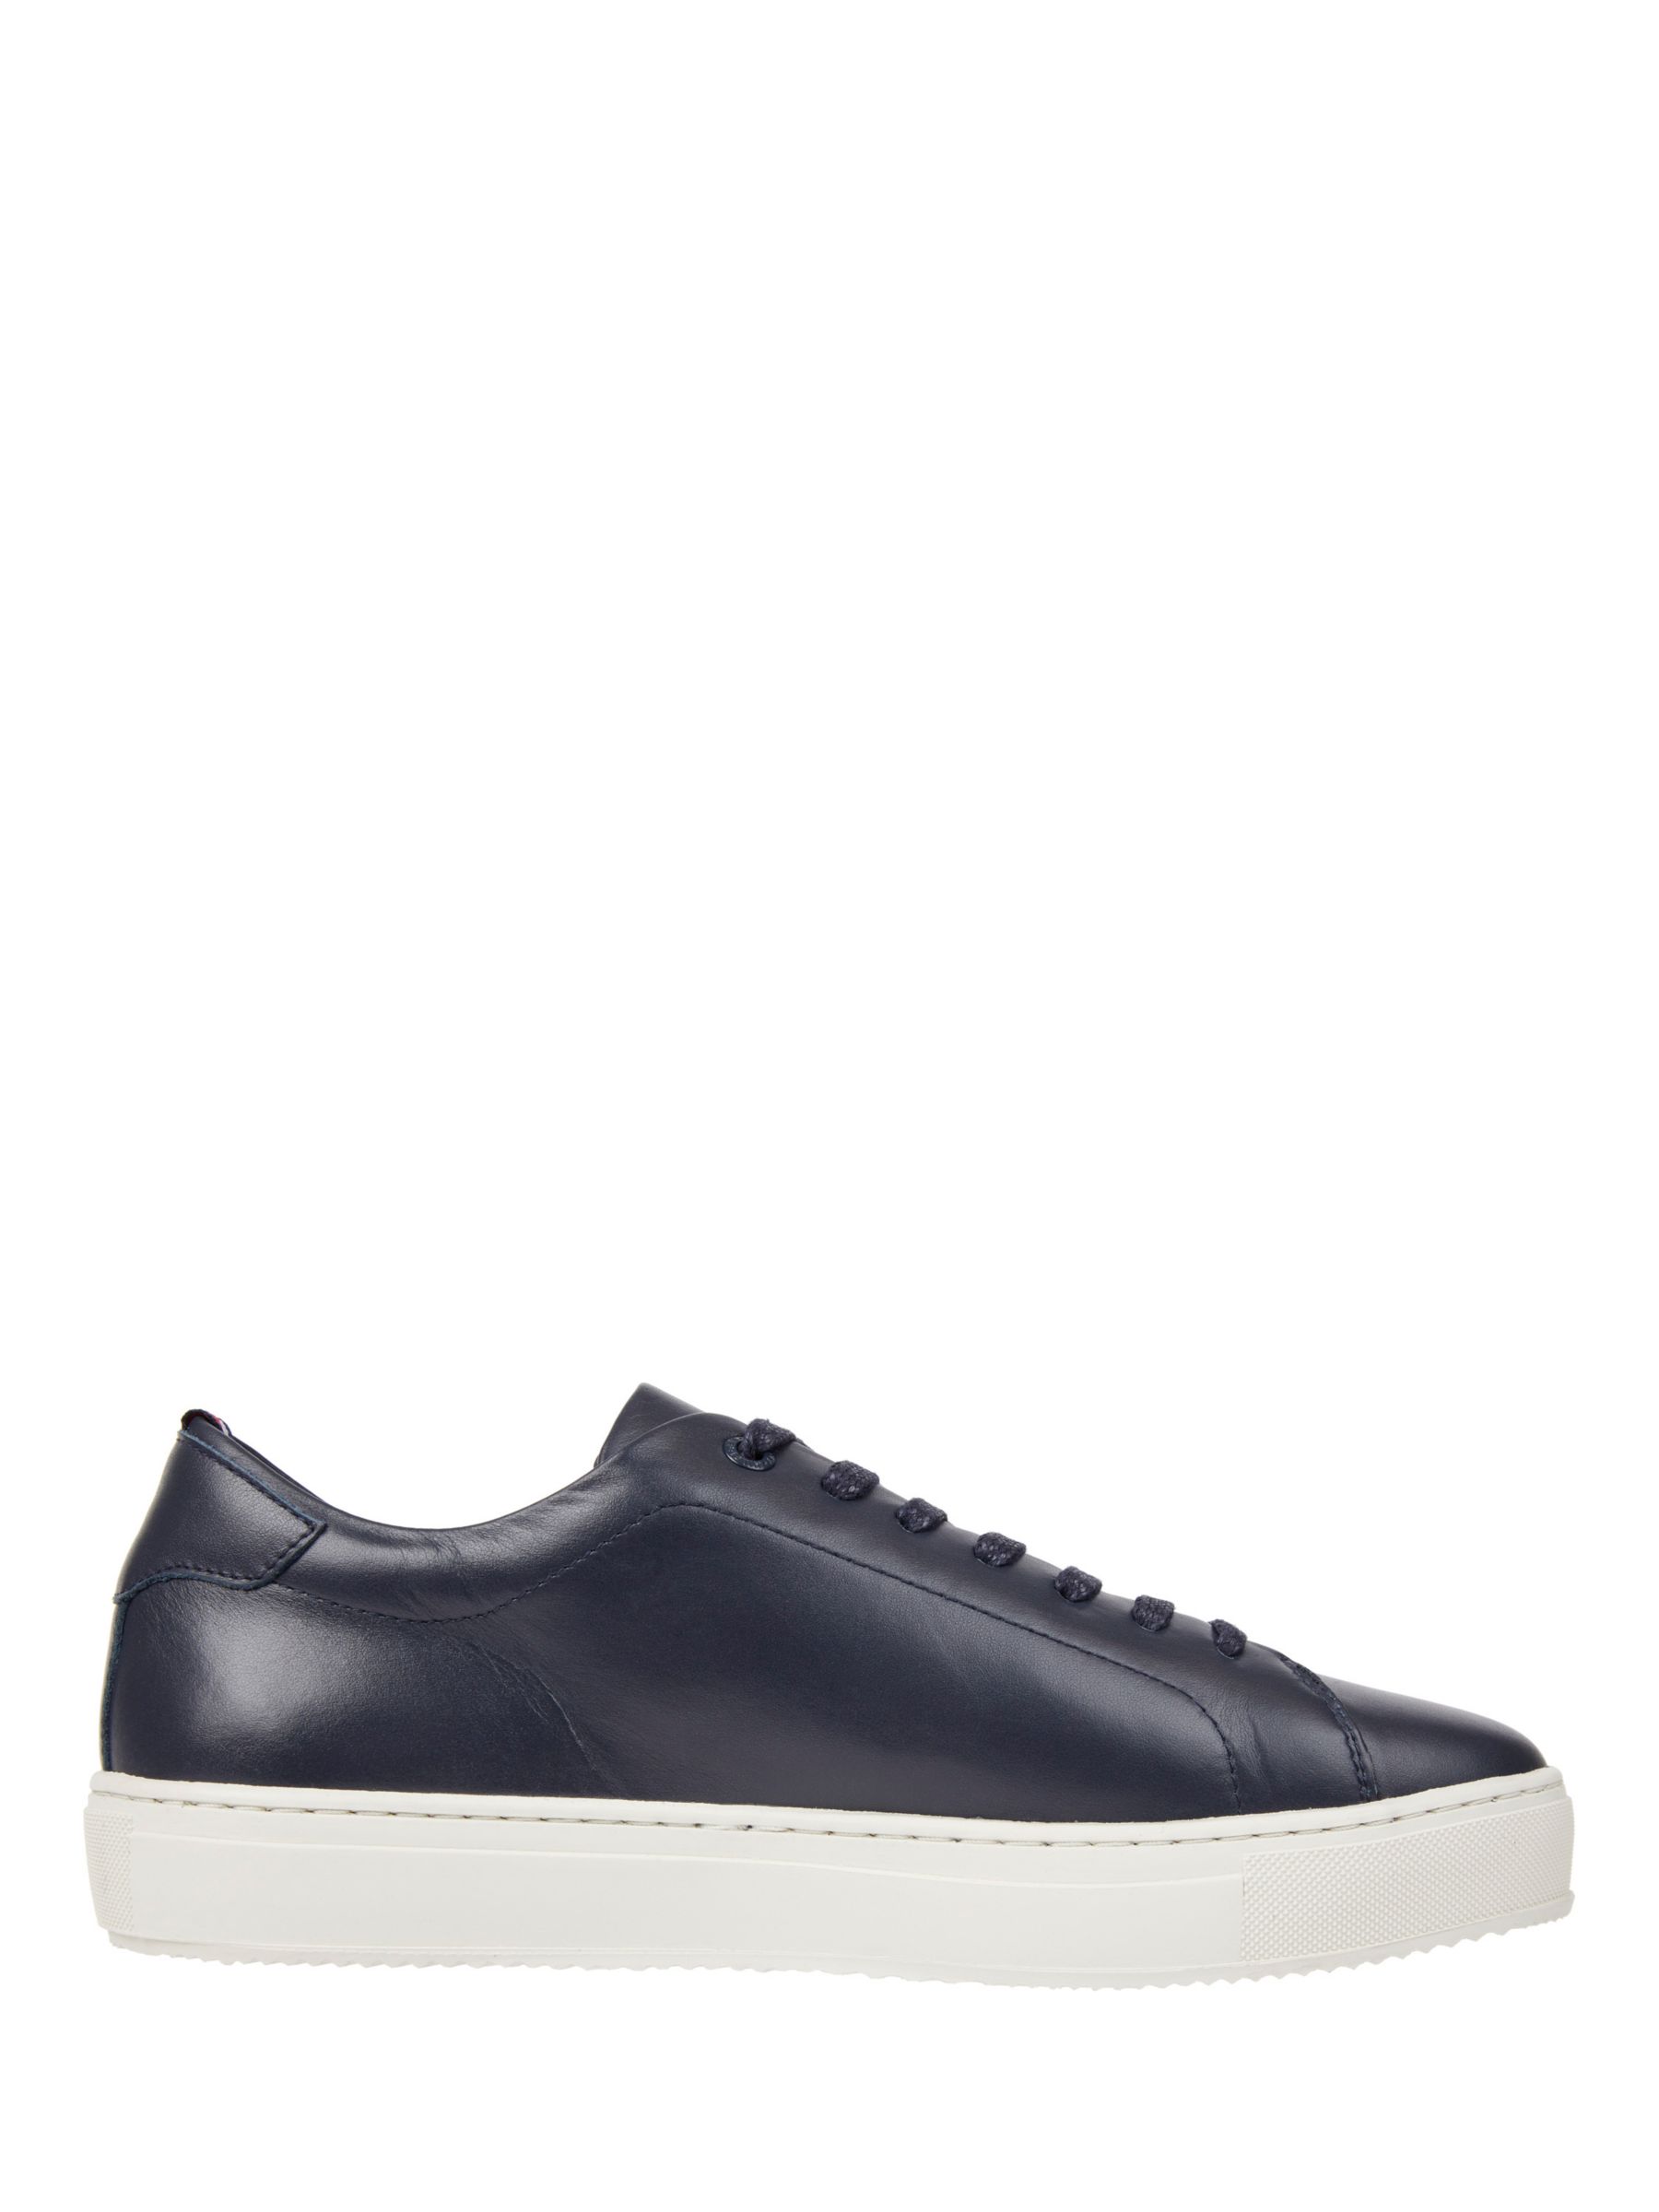 Tommy Hilfiger Heritage Premium Leather Trainers, Navy at John Lewis ...